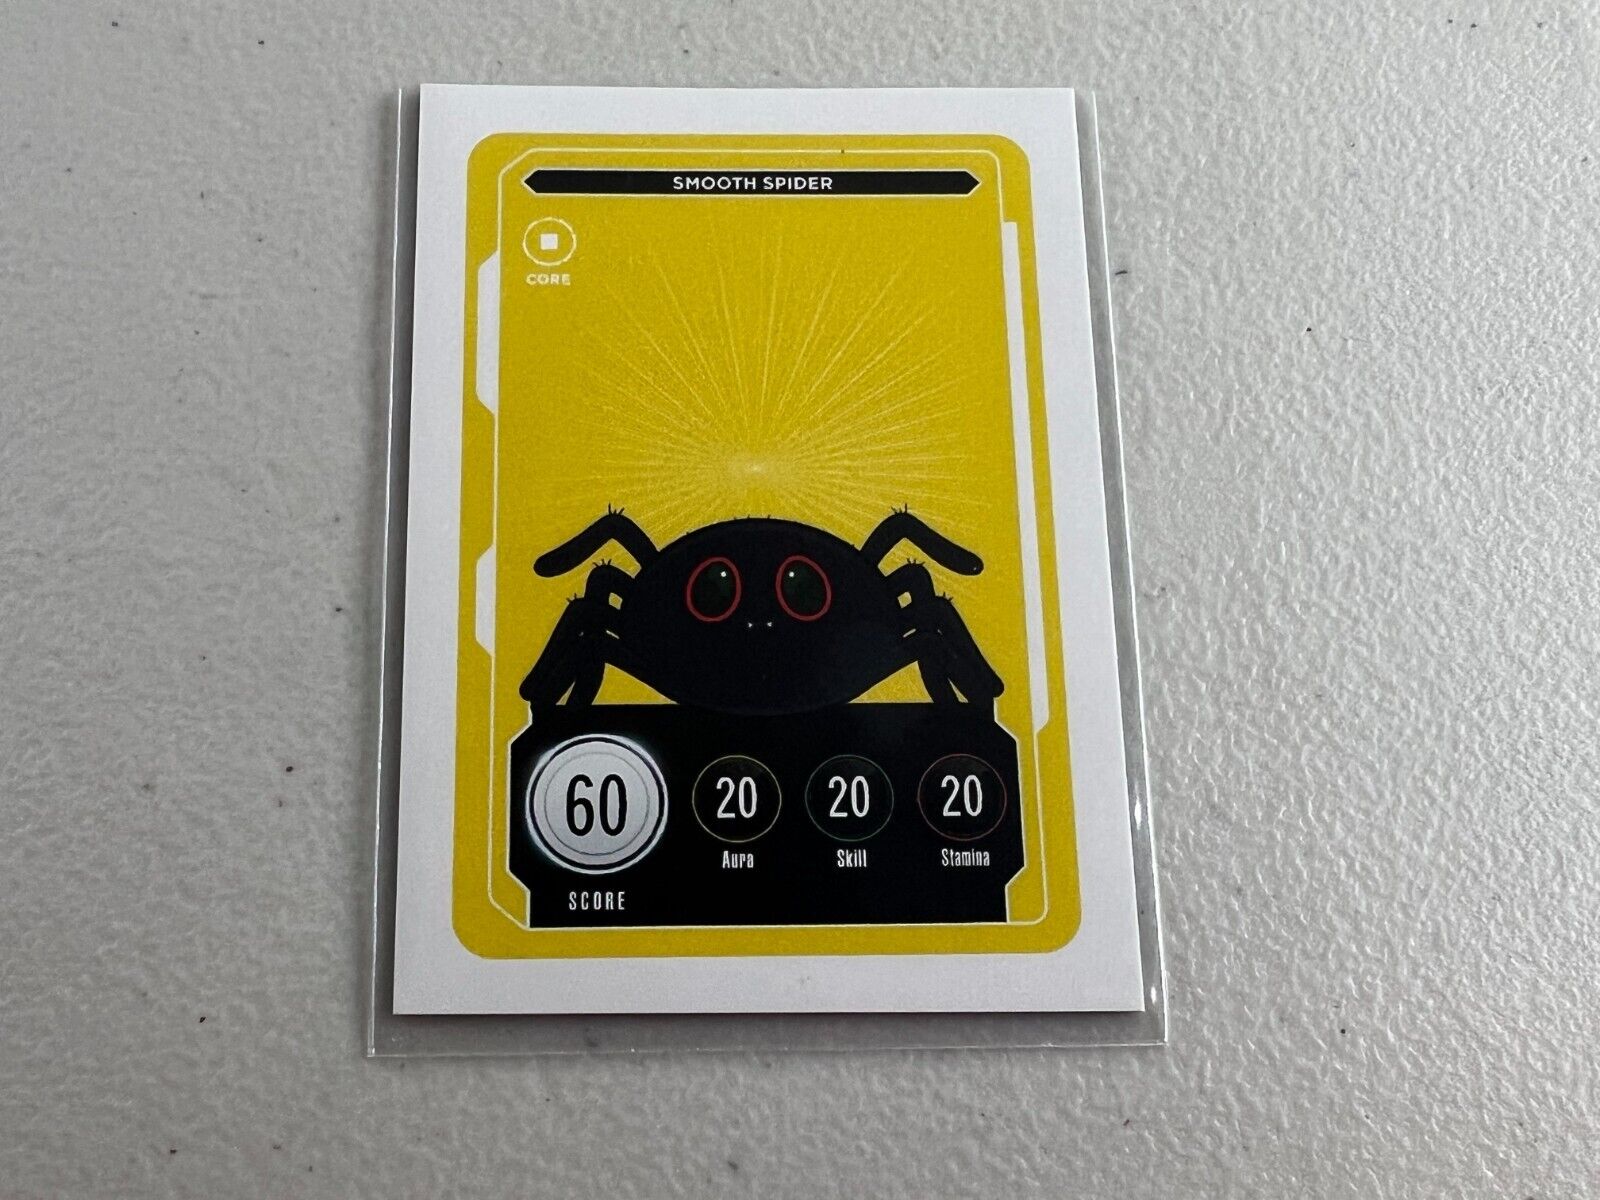 VeeFriends Smooth Spider Series 2 Compete and Collect Core Card Gary Vee